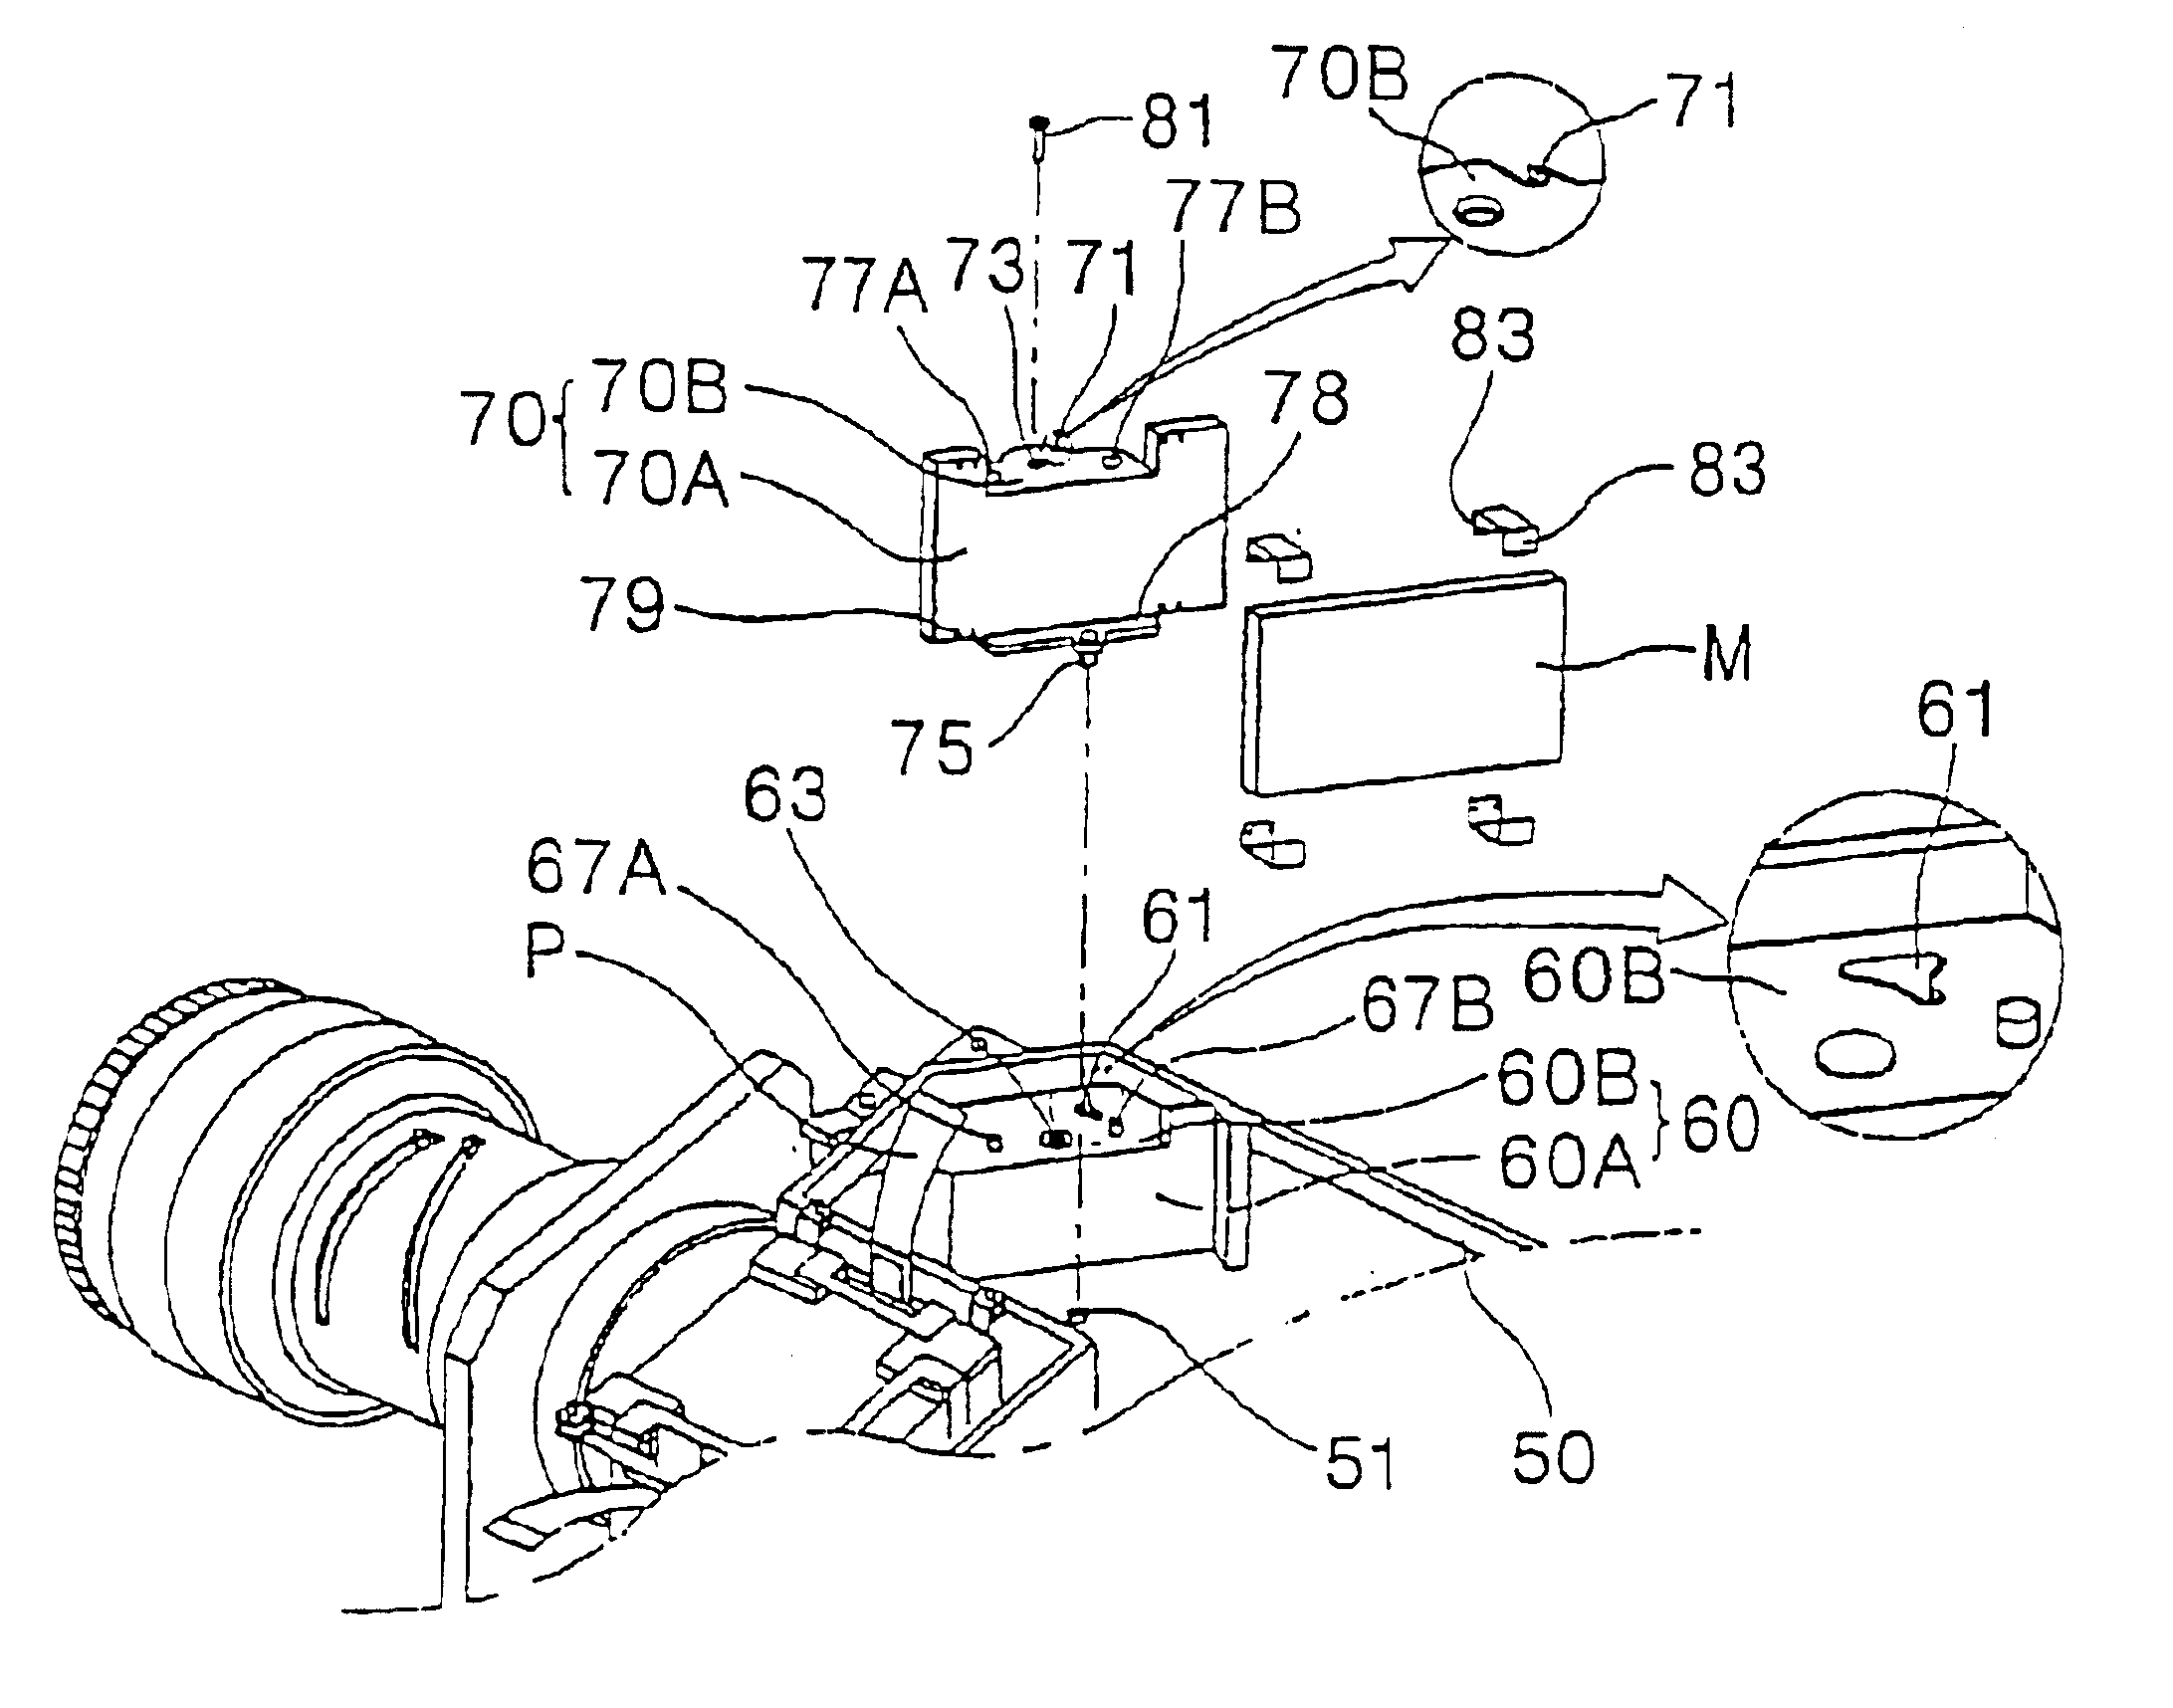 Apparatus for adjusting position of mirror in projector